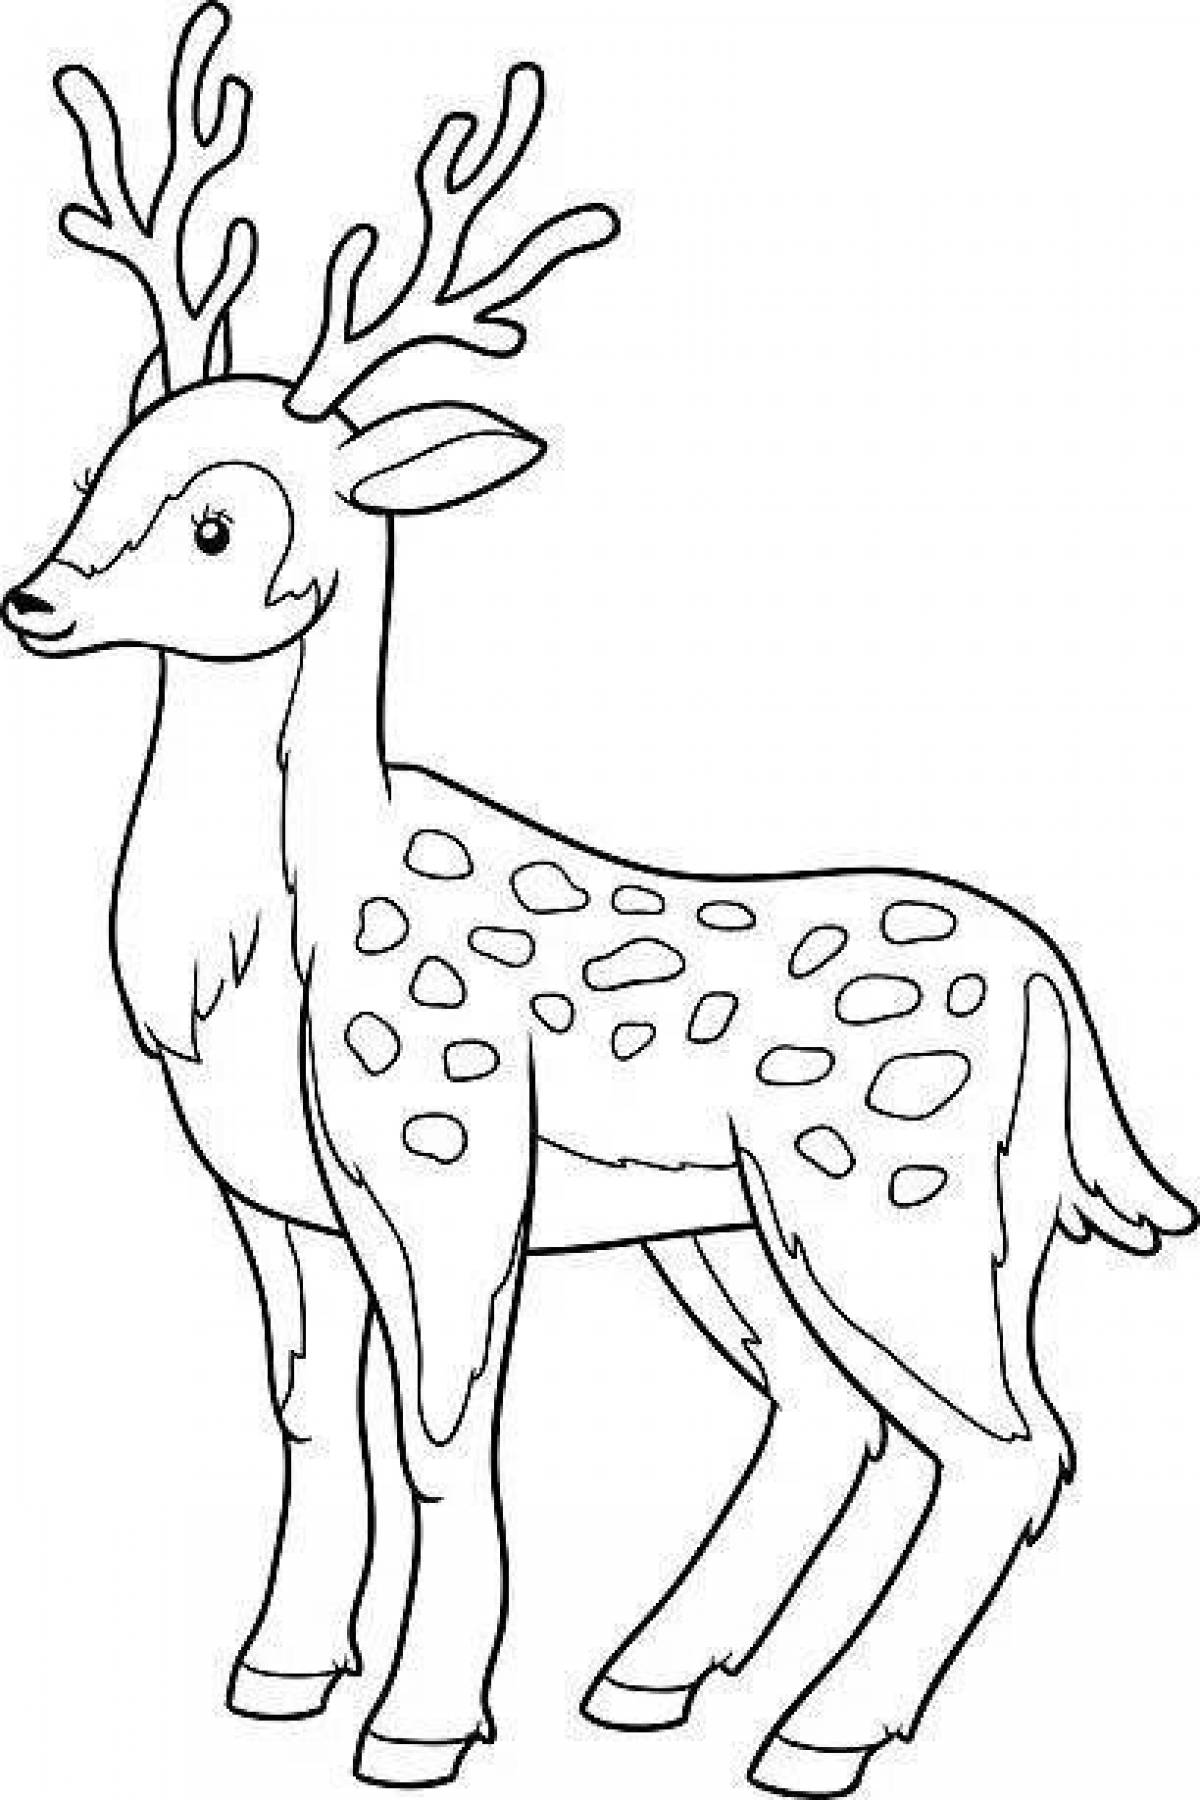 Blissful sika deer coloring page